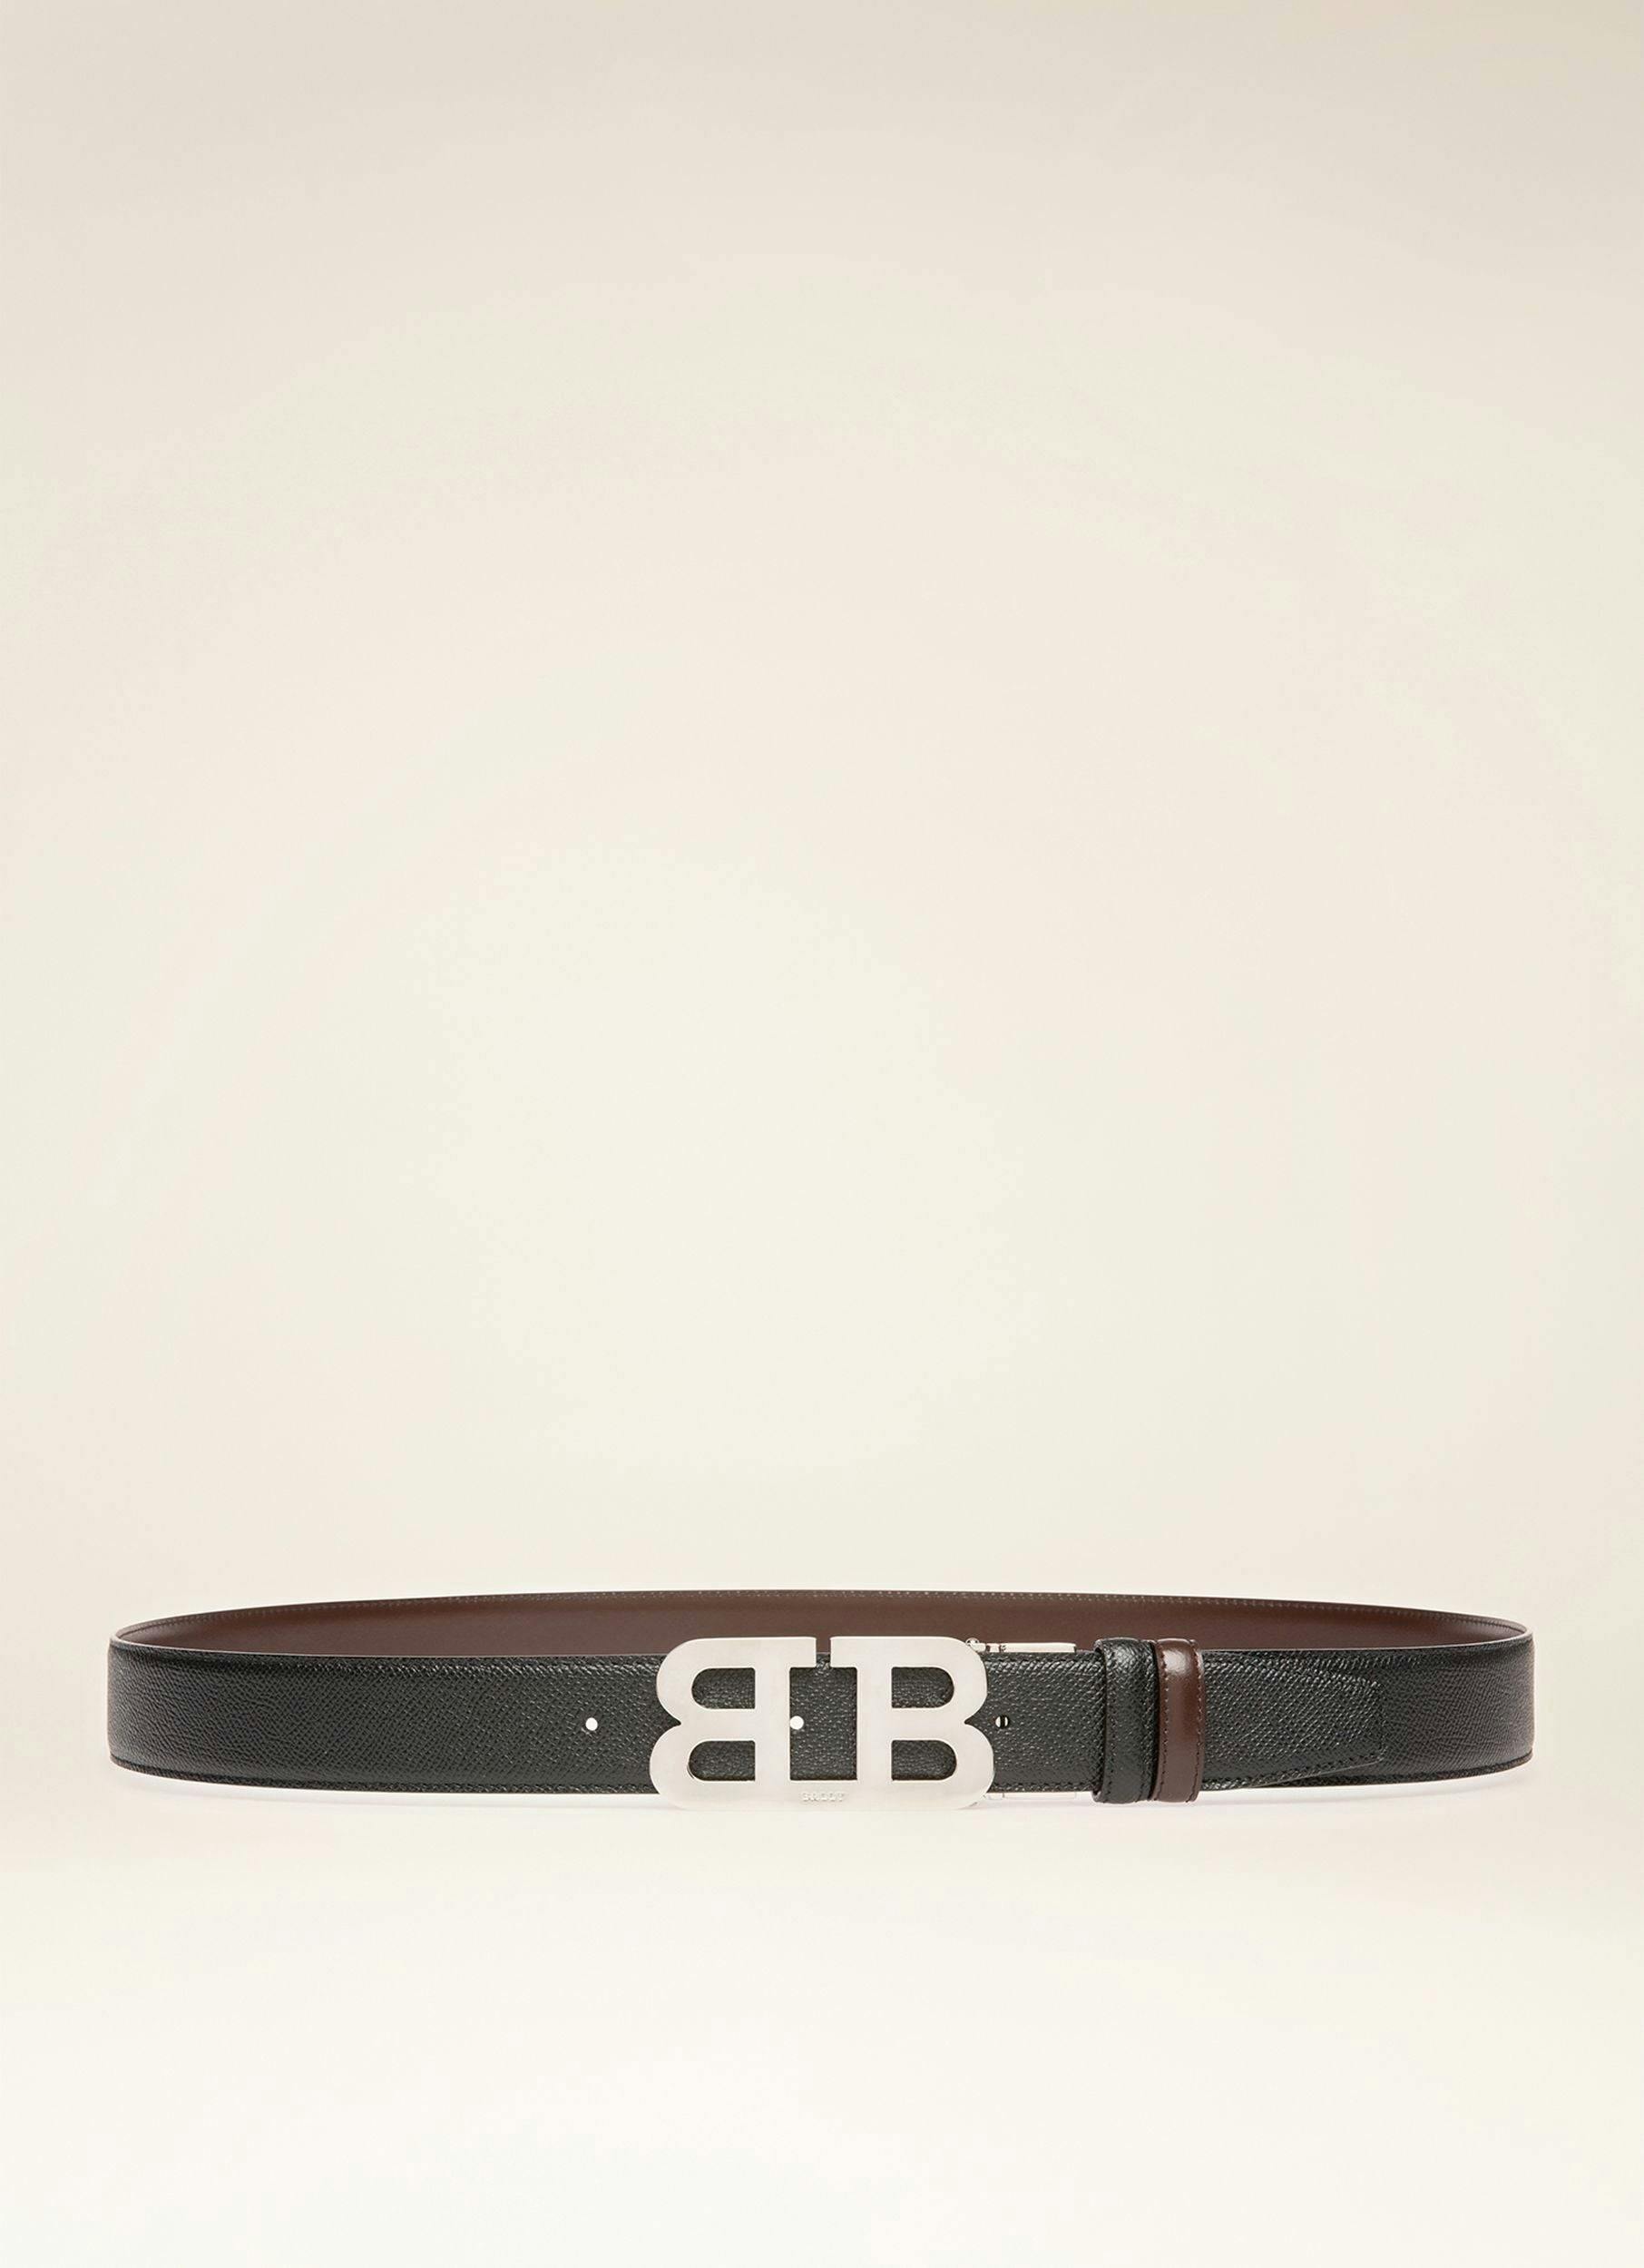 BALLY ICONIC BUCKLE Leather 35Mm Belt In Black & Brown - Men's - Bally - 01